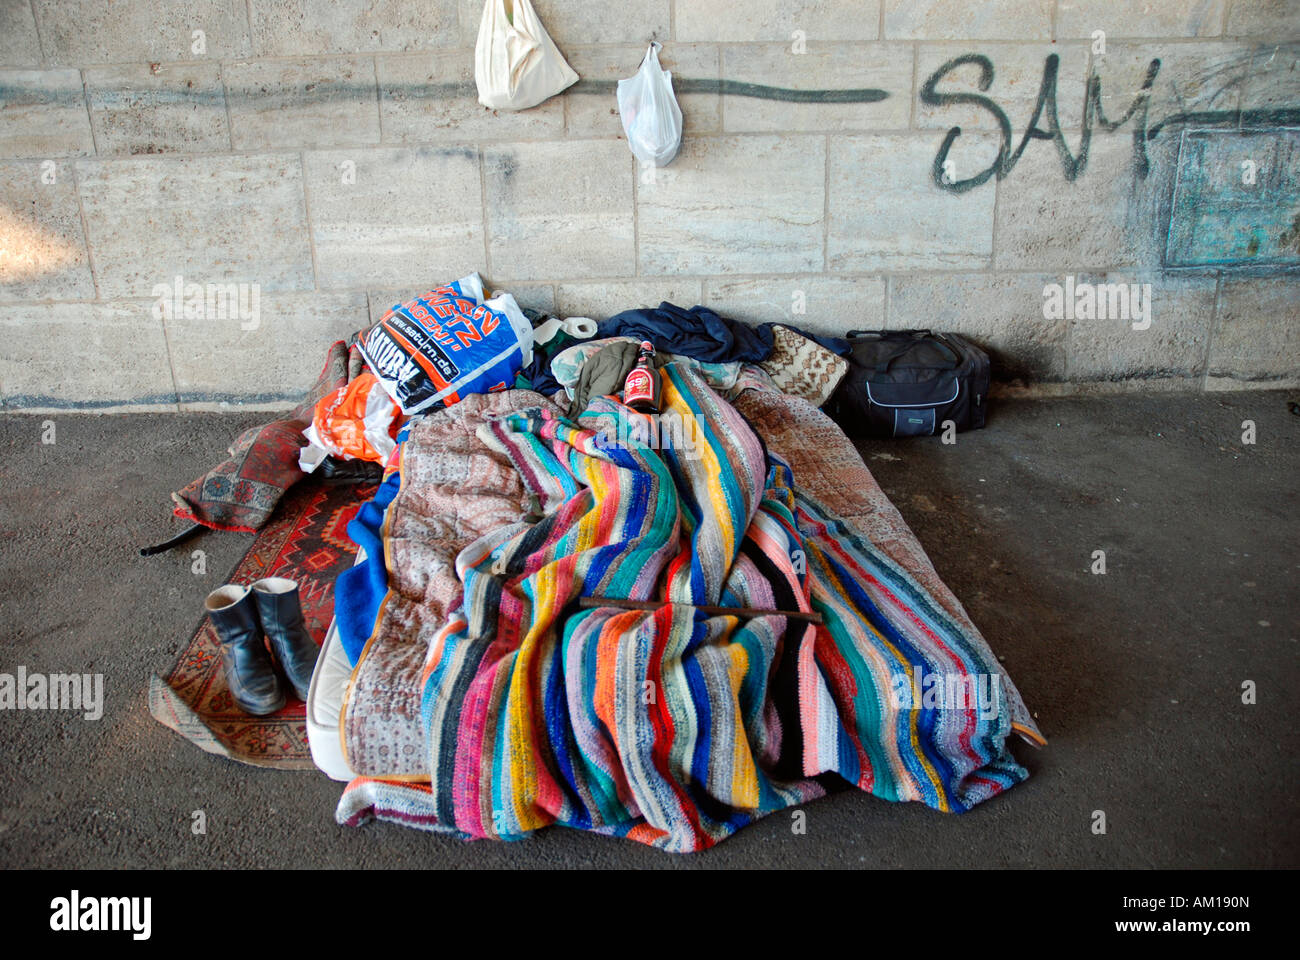 Bed of a homeless person, Cologne, North Rhine-Westphalia, Germany, Europe Stock Photo